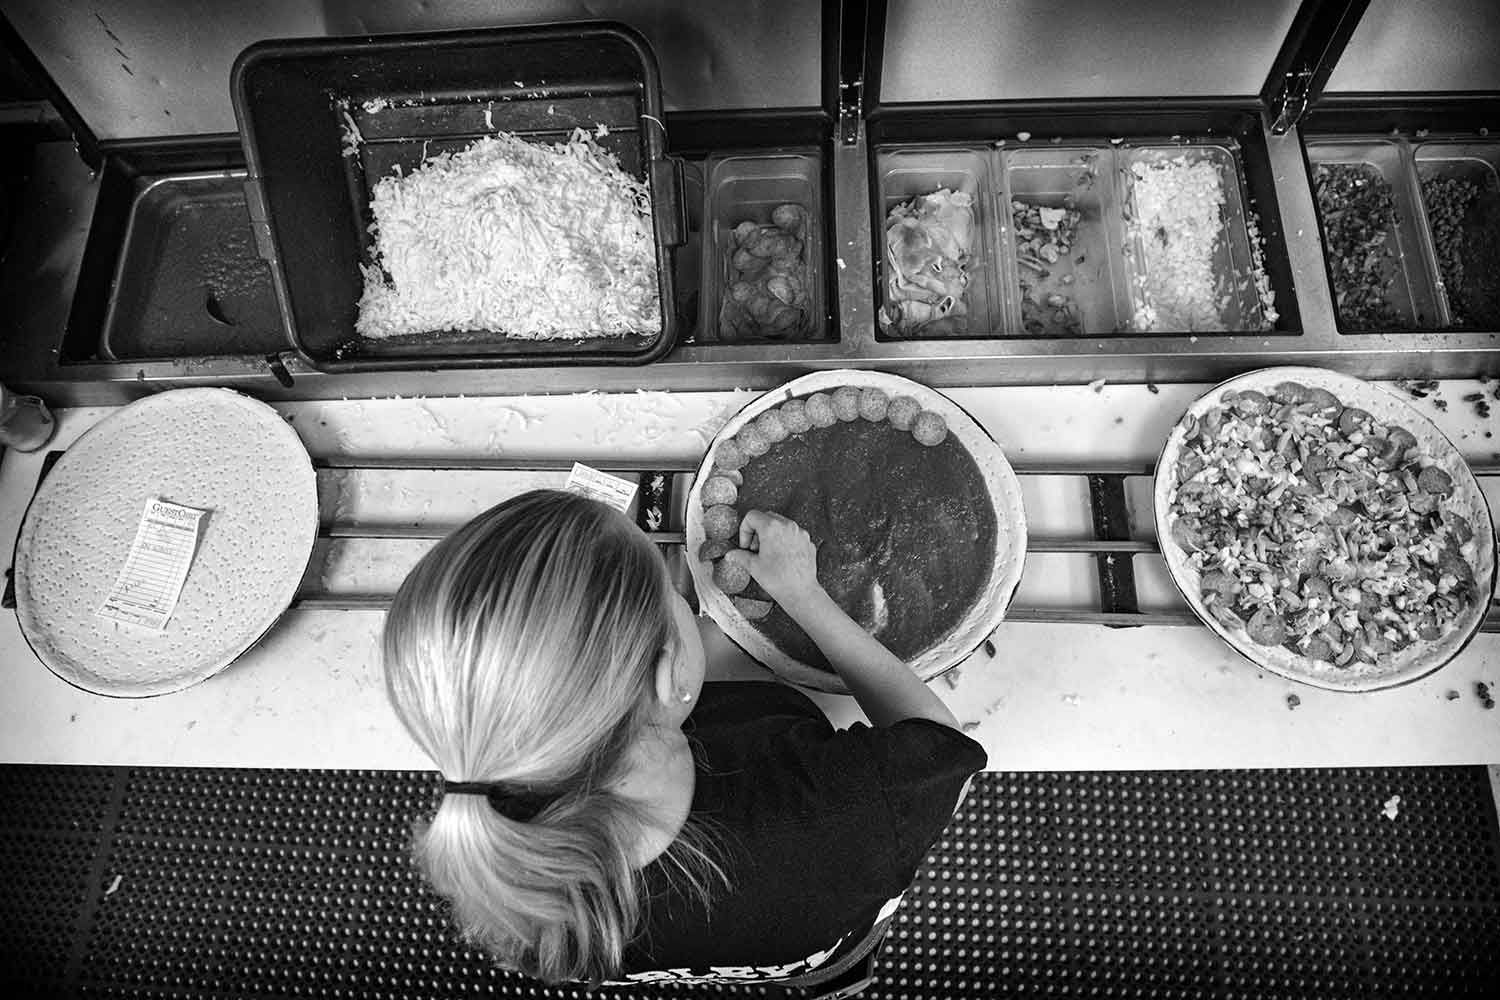 Ciarra Wallace places toppings on a pizza at Charleyʼs Pizza Parlor. photo by Austin Perryman - 2018